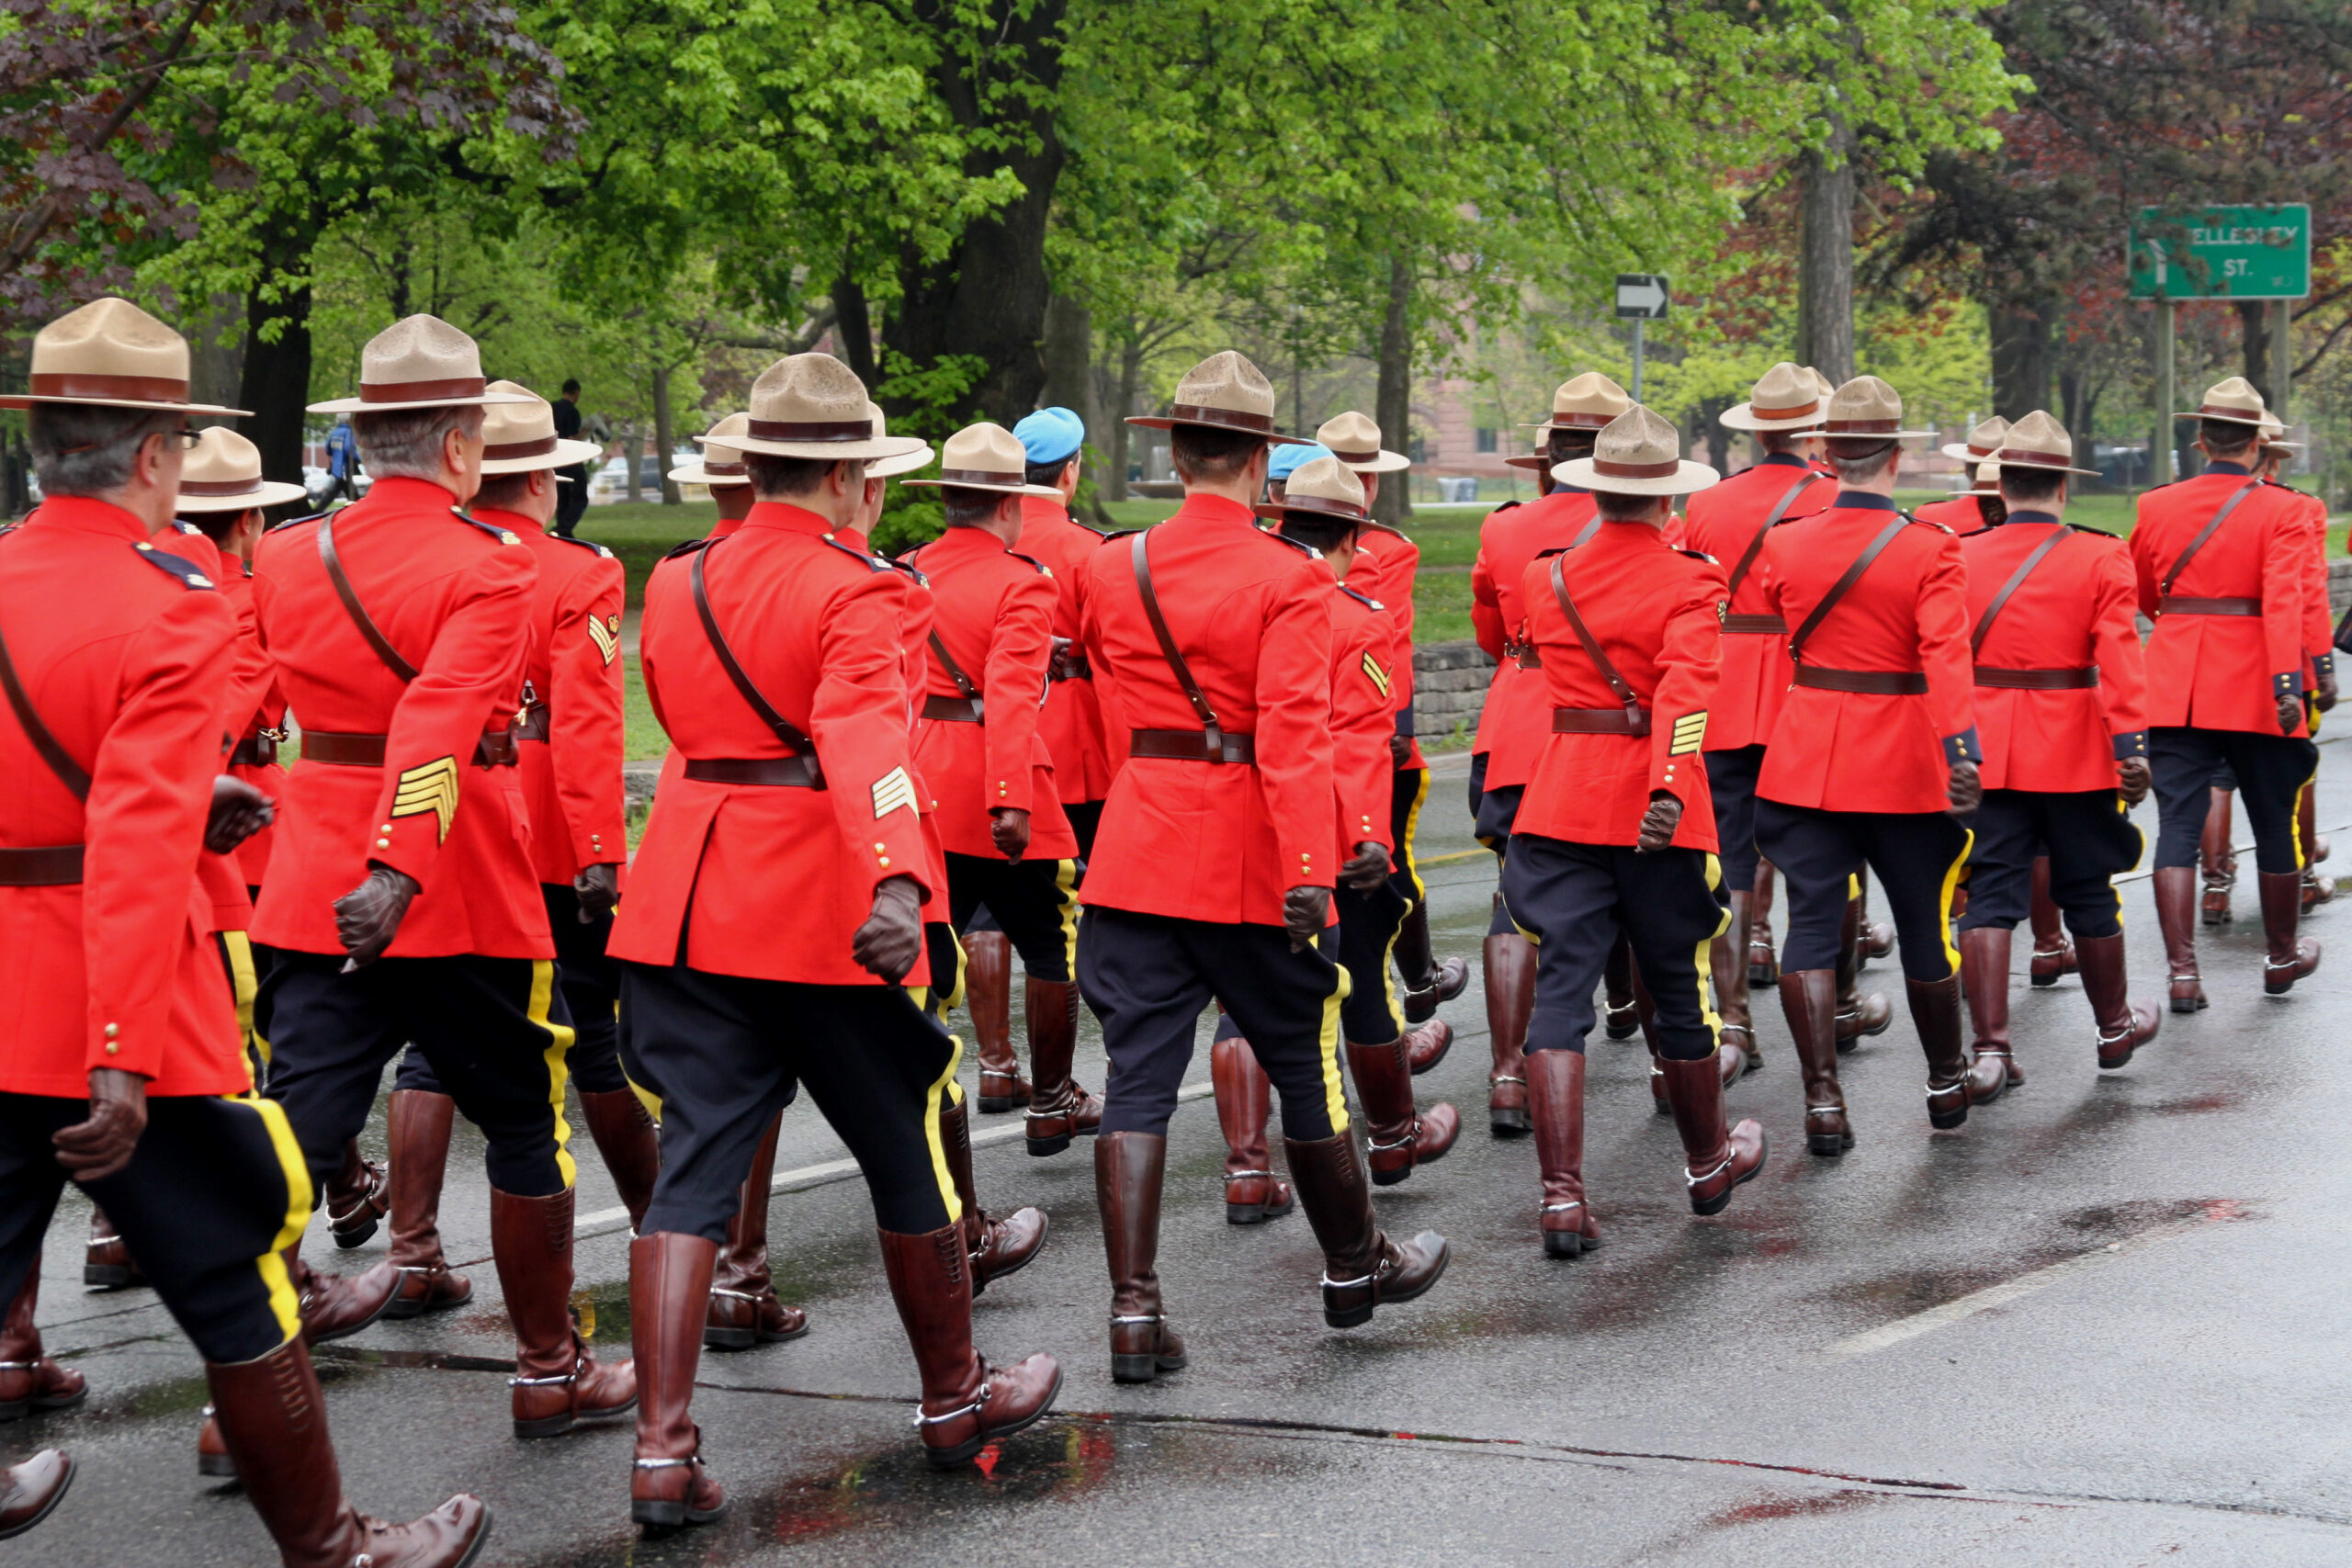 RCMP marching wearing red serge